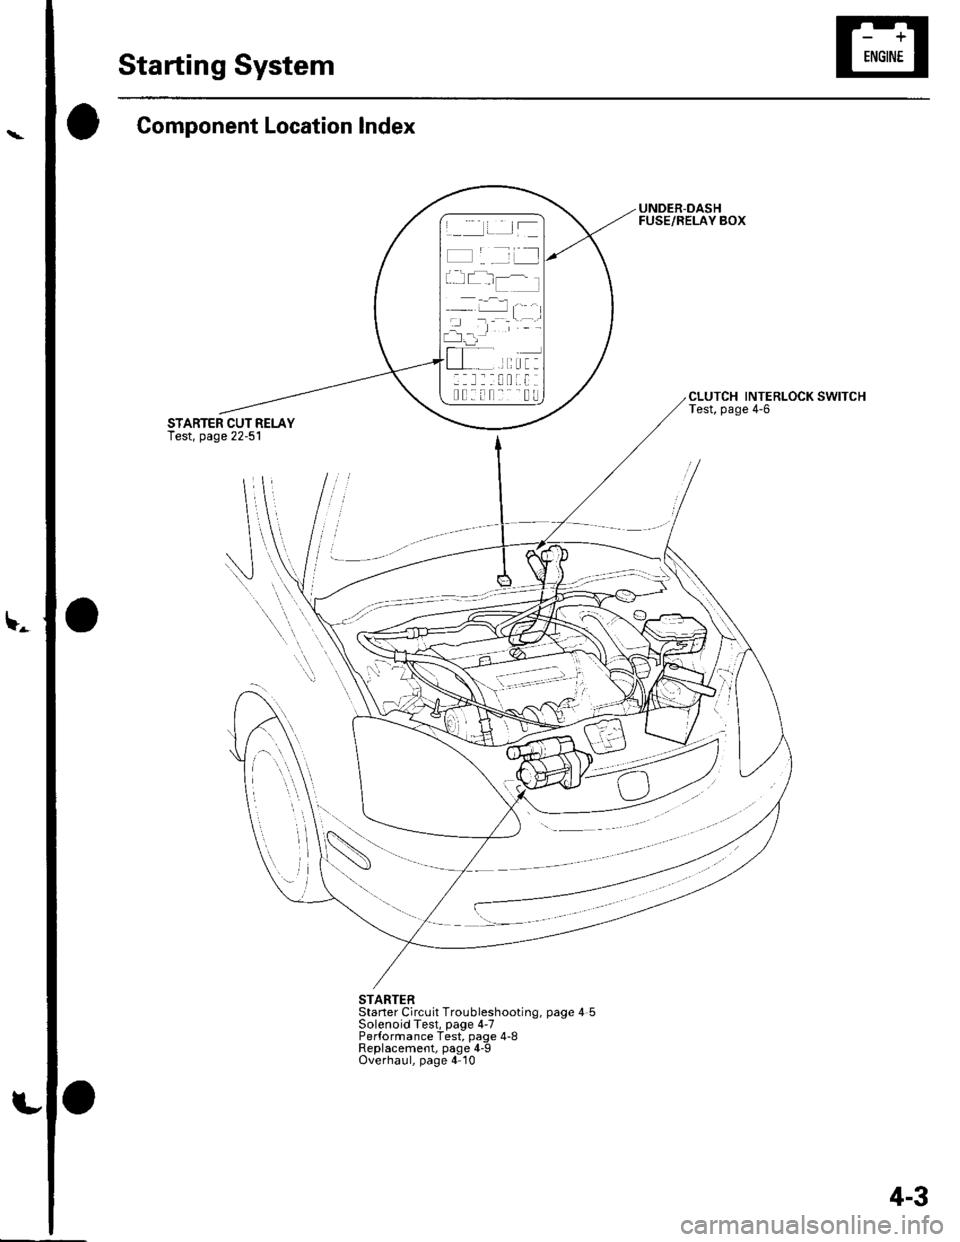 HONDA CIVIC 2002 7.G Workshop Manual \-
Starting System
Component Location Index
UNDER-DASHFUSE/RELAY BOX
CLUTCH INTERLOCK SWITCHTest, page 4-6
STARTERStaner Circuit Troubleshoot,ng, page 4 5Solenoid Test, page 4-7Performance Test, page 